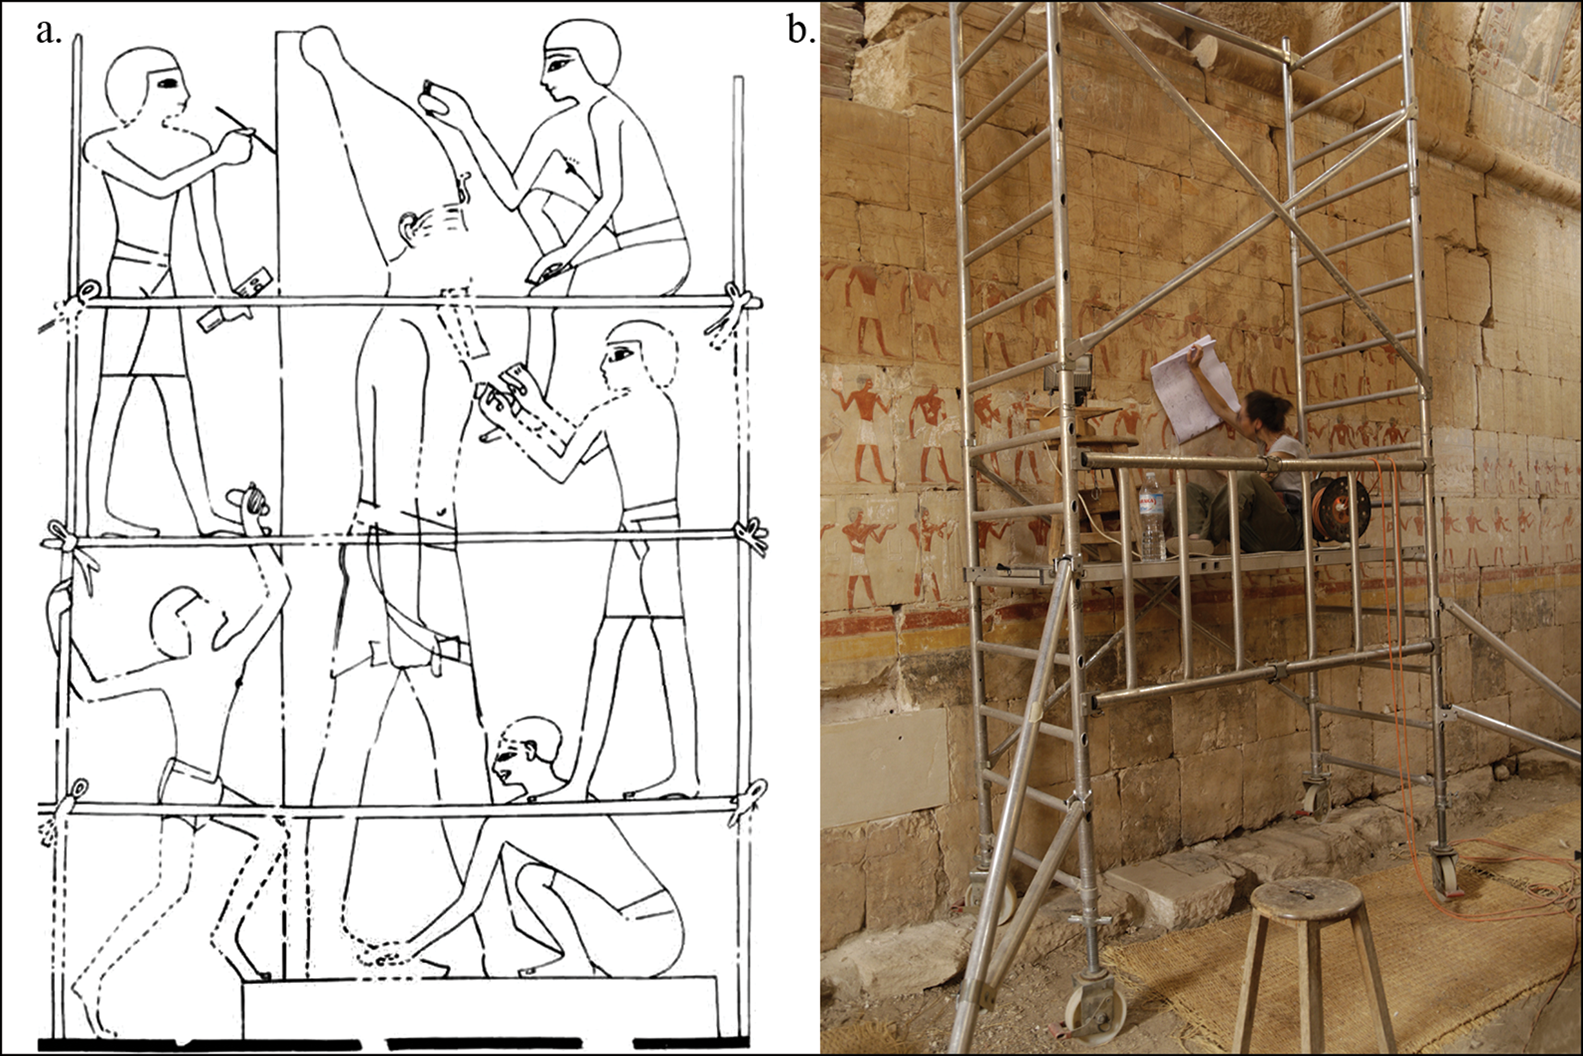 a - Egyptian sculptors in the woods (depiction in the tomb of the nobleman Rehmir); b - scaffolding erected during the study of reliefs in the Chapel of Hatshepsut. Credit: Anastasiia Stupko-Lubczynska / Antiquity, 2021